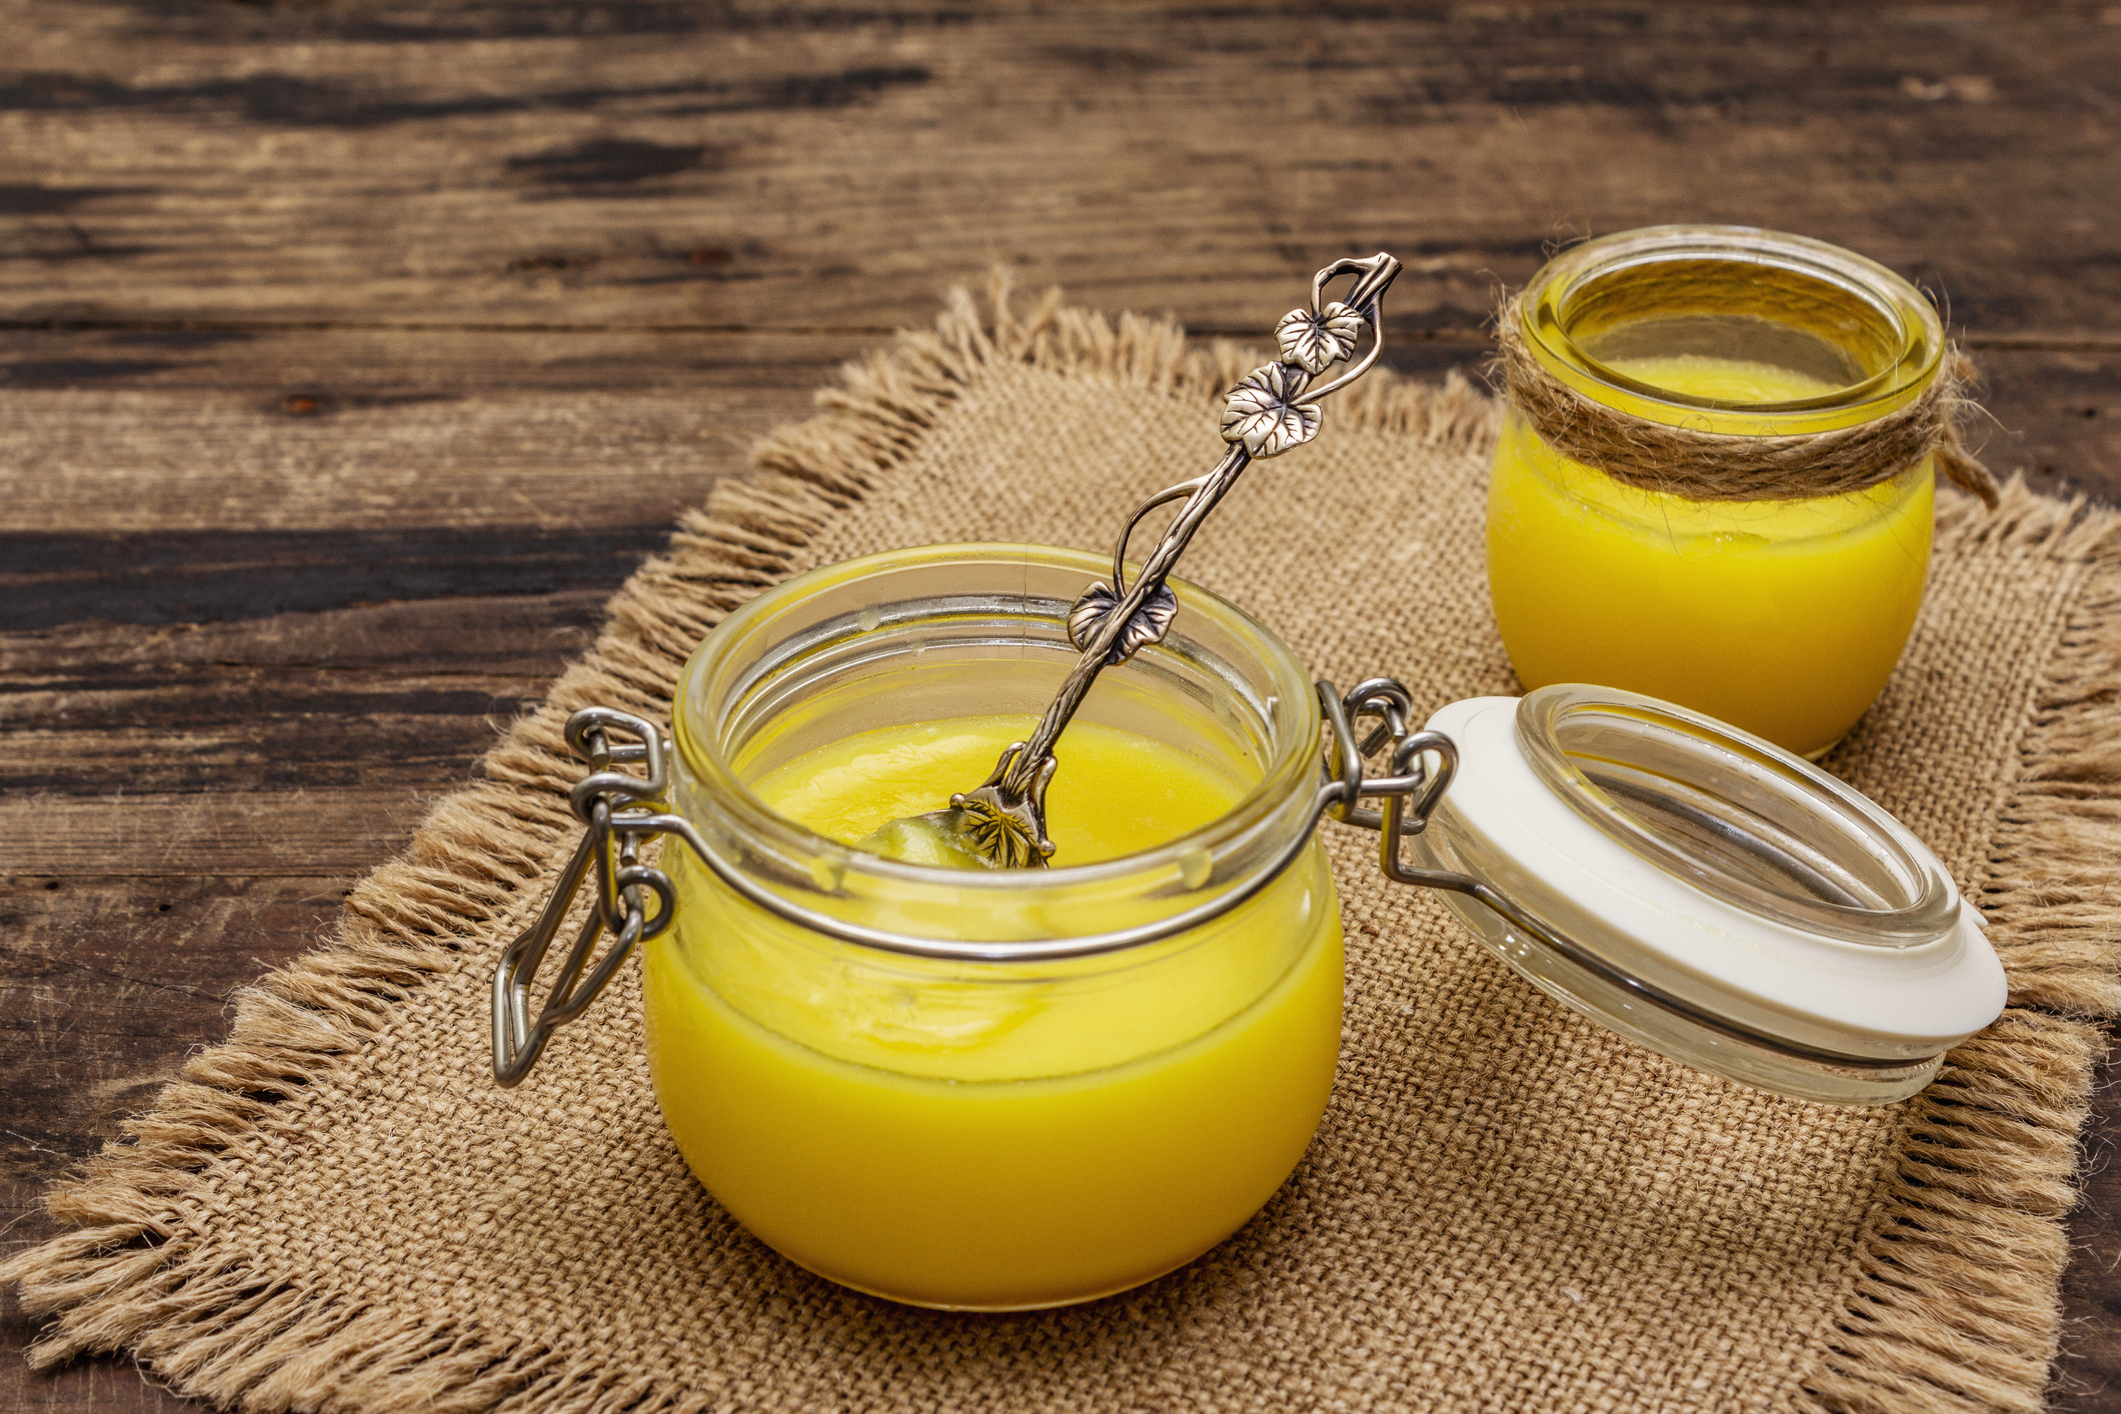 Is Ghee Good for PCOS?